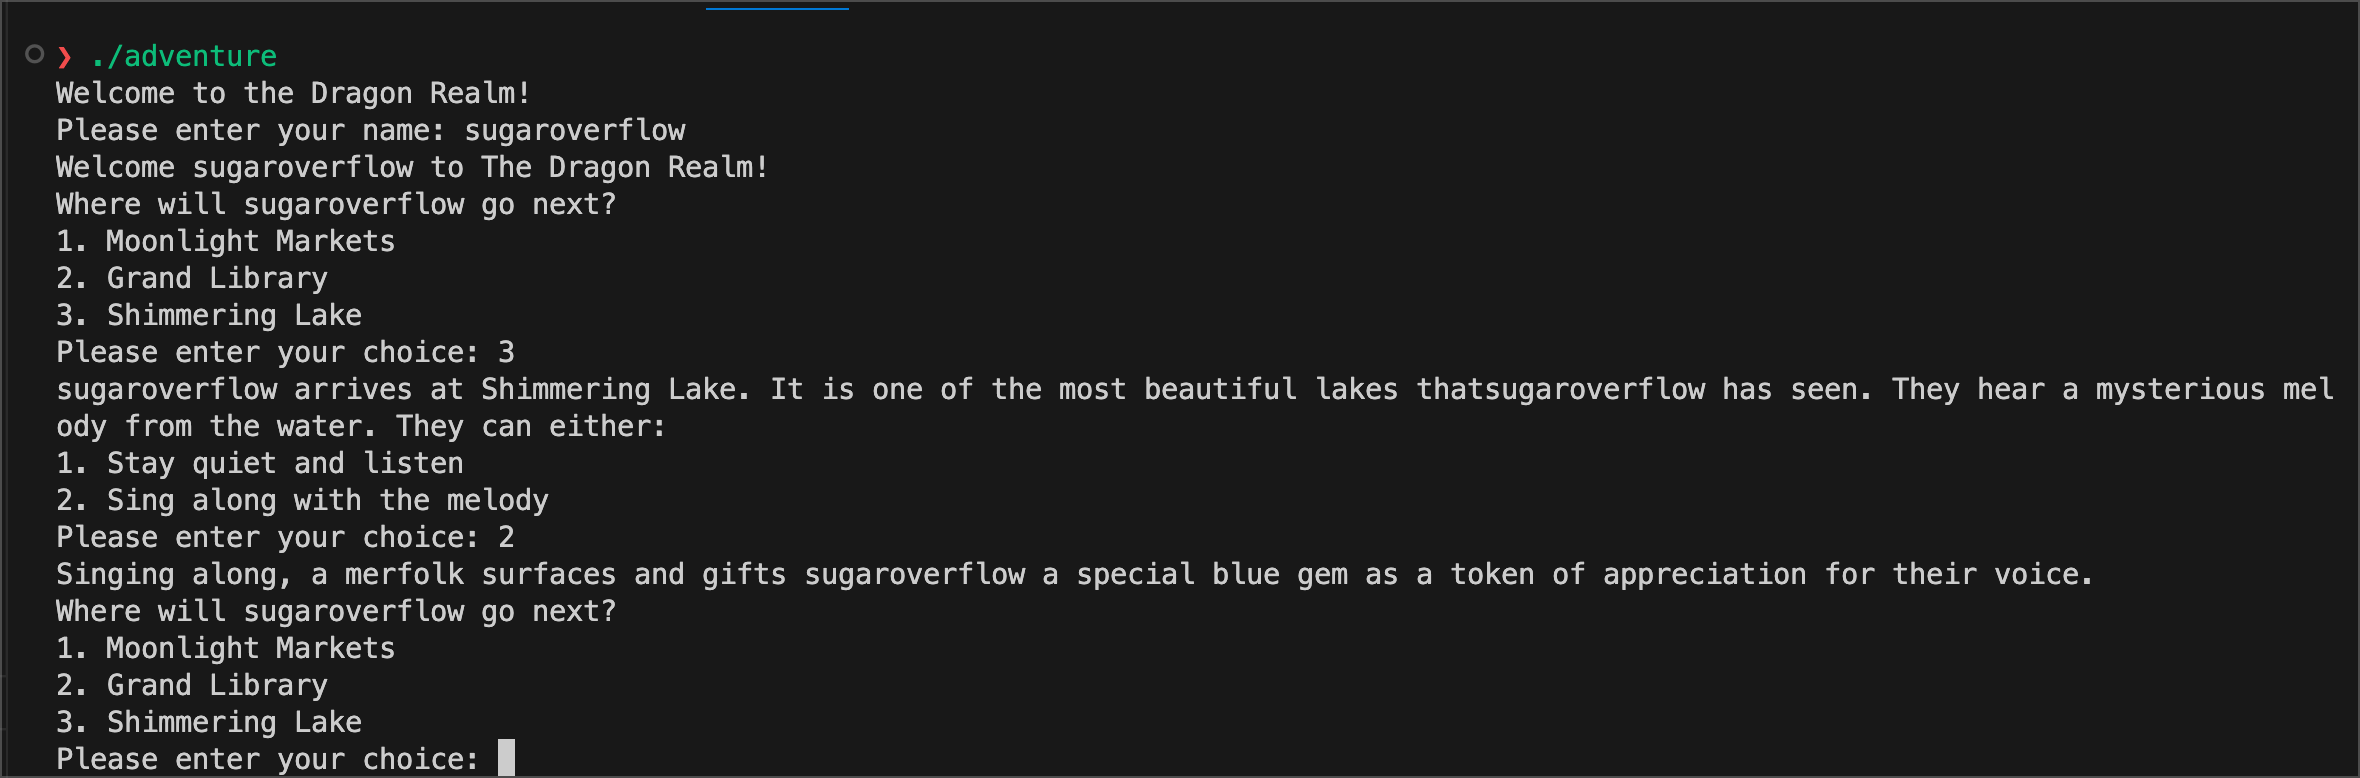 adventure.cpp build output - the player is called sugaroverflow and heads to the Shimmering Lake and receives a gem